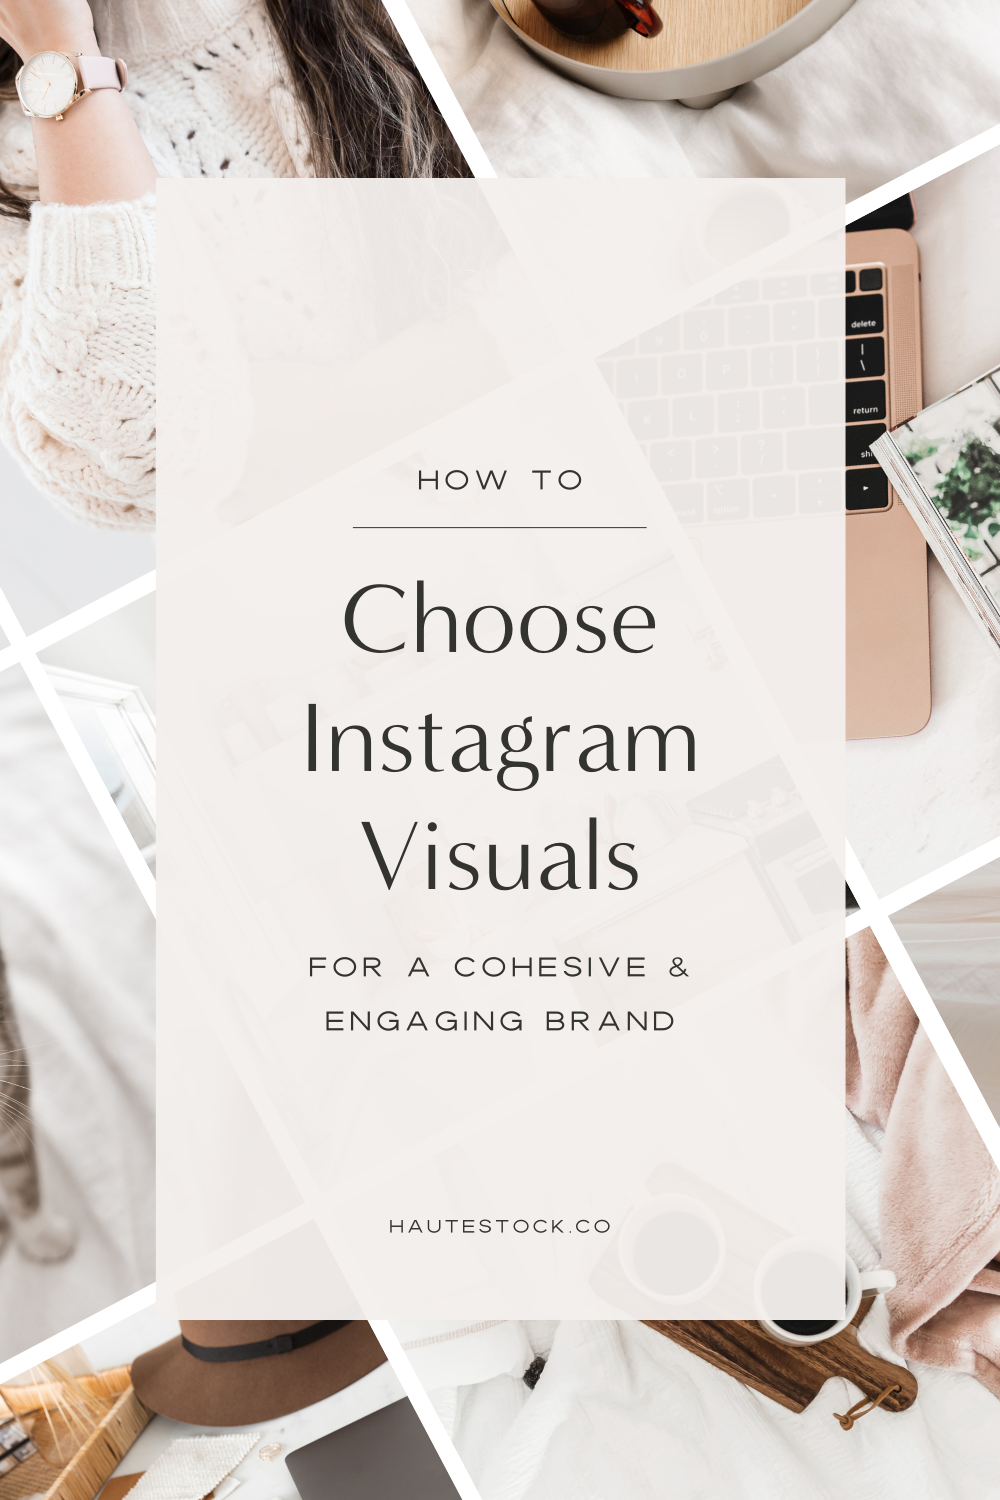 Find out Haute Stock's three visual strategies to selecting images for your brand for instagram. Never stress again with these easy tips!